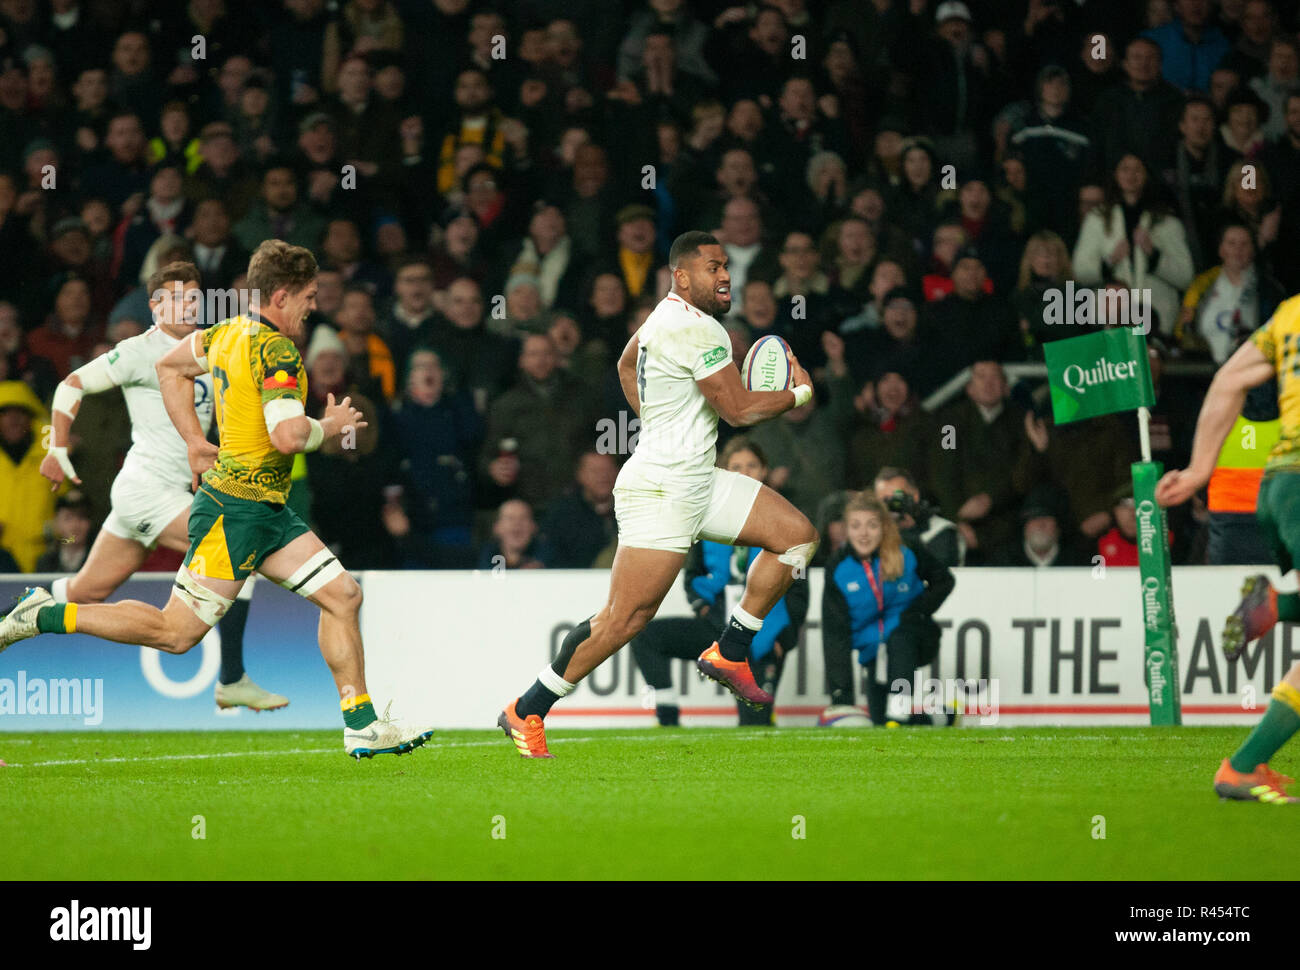 Twickenham, UK. 24th November 2018. England's Joe Cokanasiga runs with the ball during the Quilter International Rugby match between England and Australia. Andrew Taylor/Alamy Live News Stock Photo